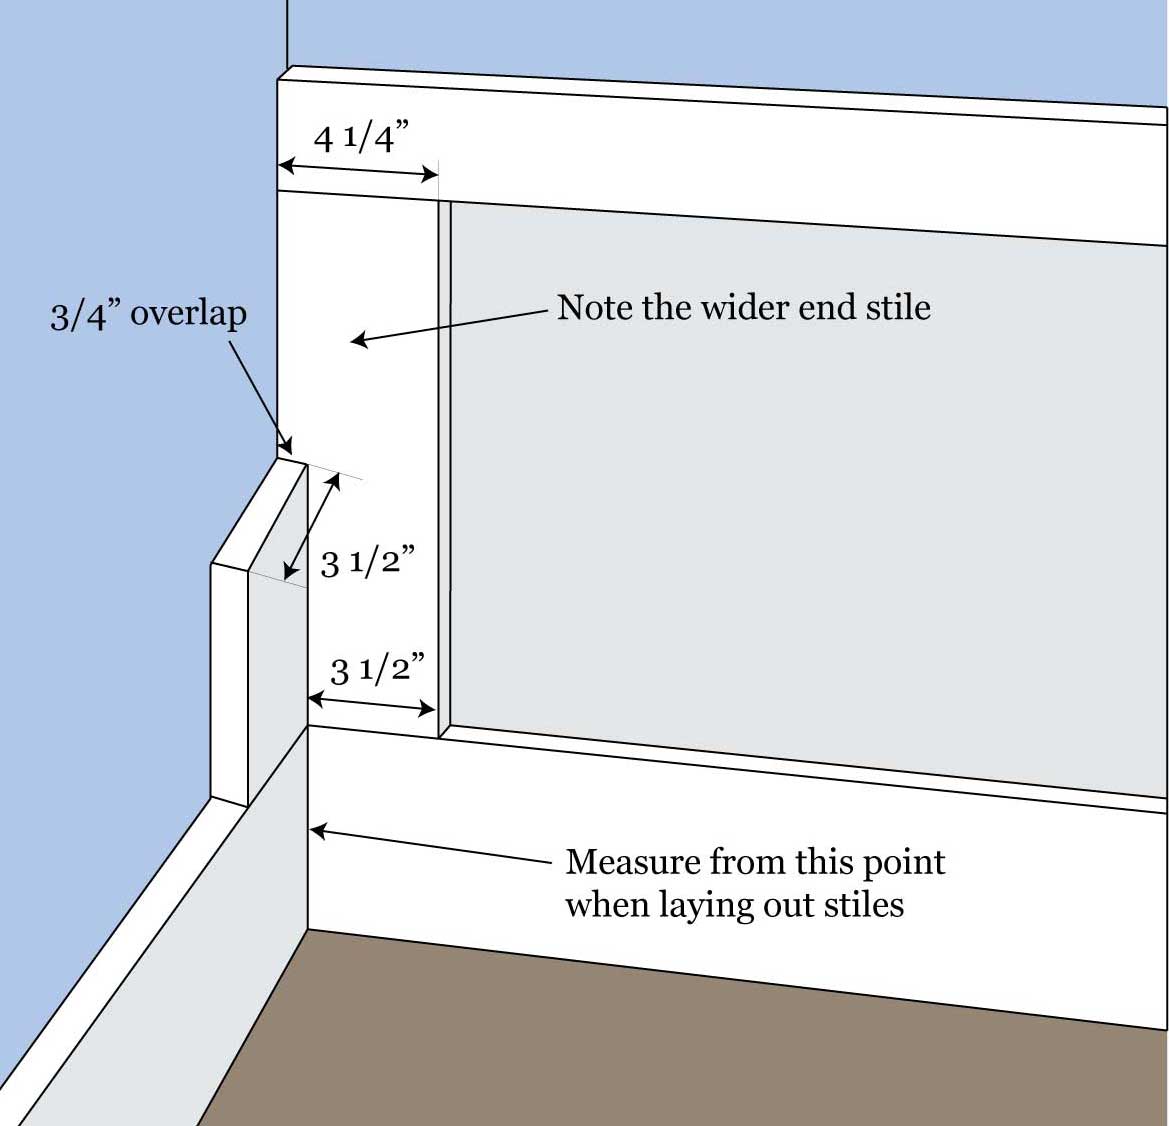 Illustration showing the detail of an inner corner of a waisncoting installation, detailing how to account for inner corners by adding the thickness of the panel to the stile on the edge.